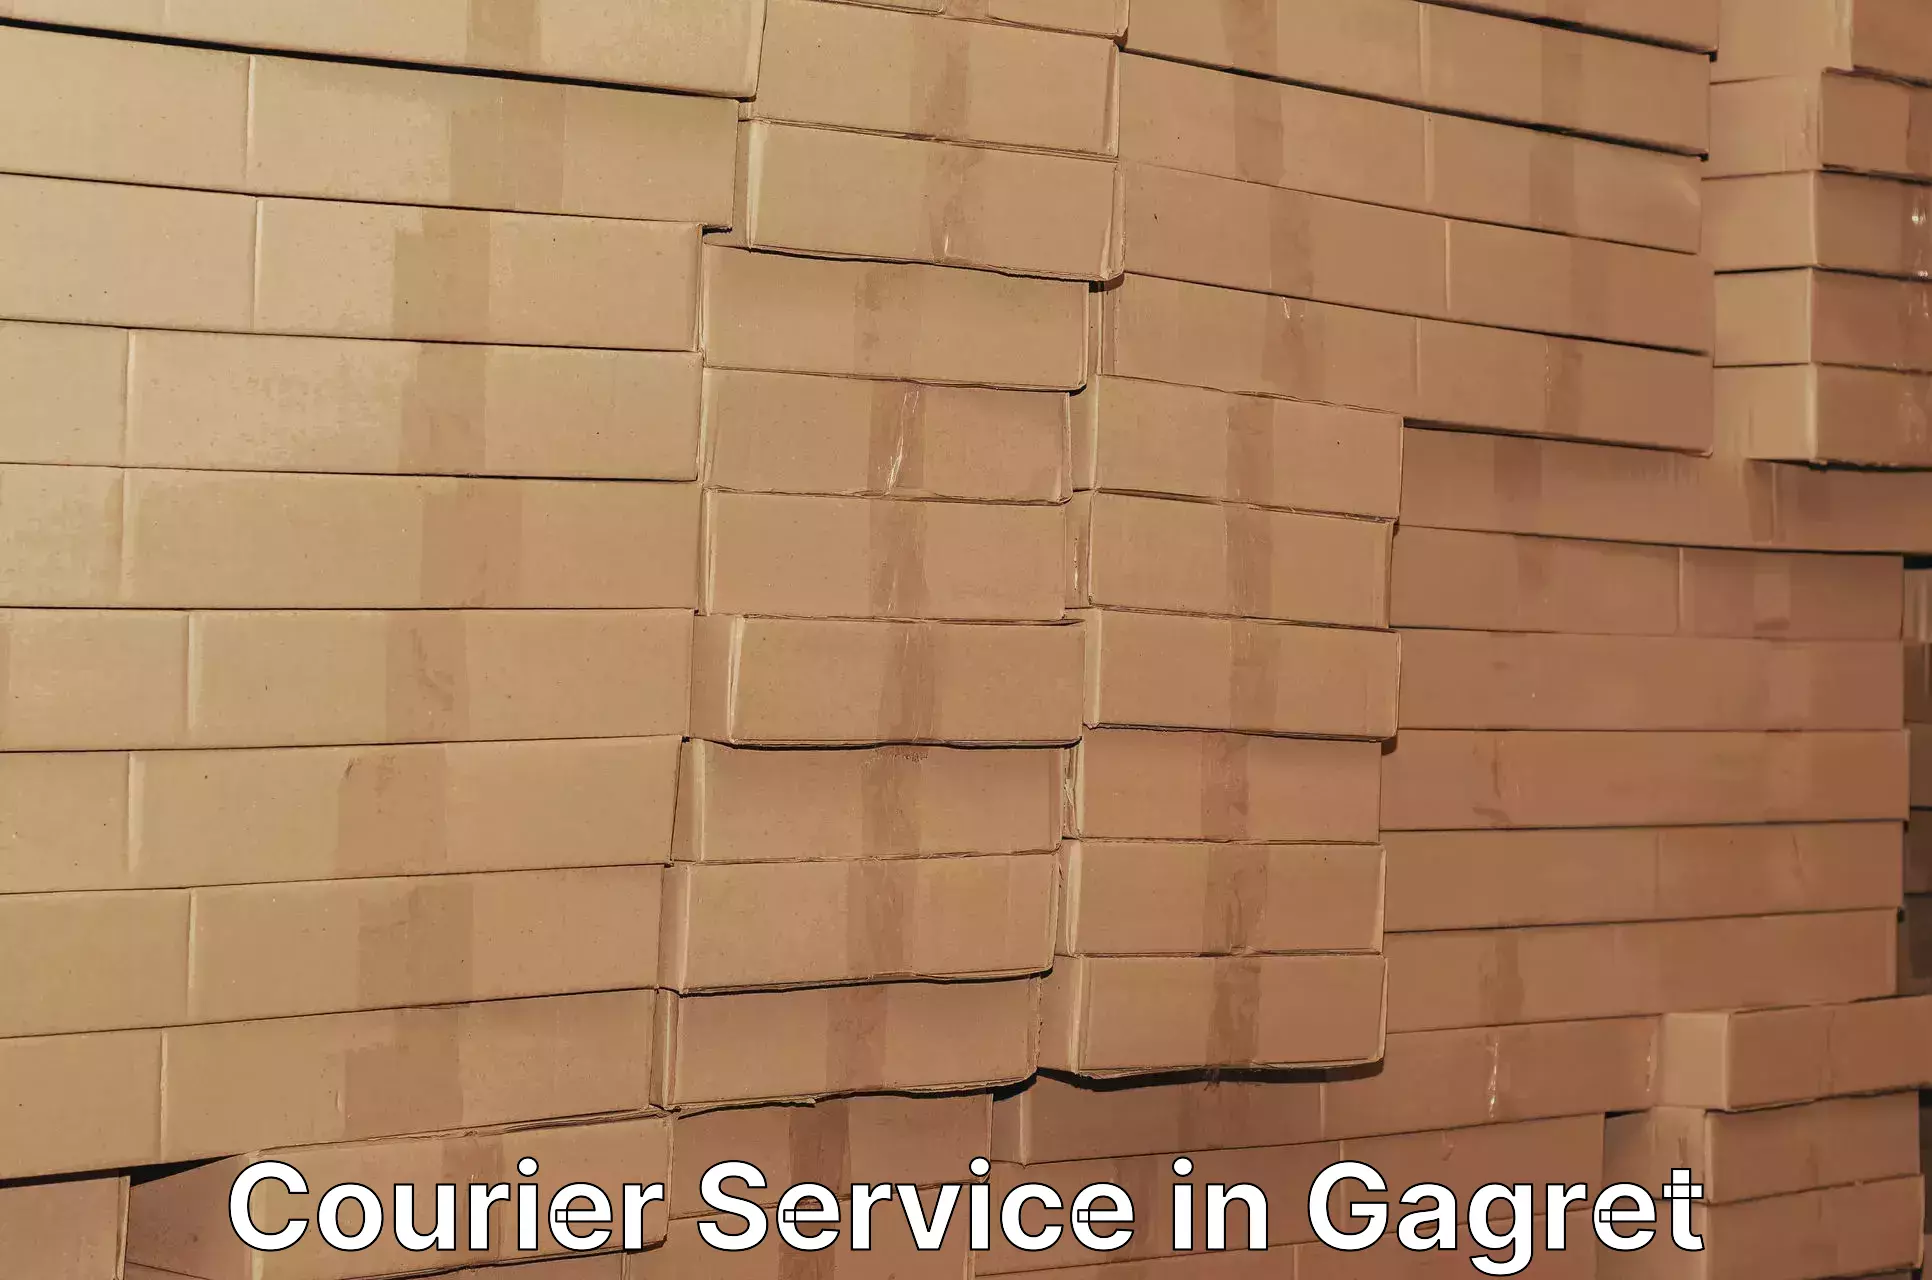 Customer-oriented courier services in Gagret